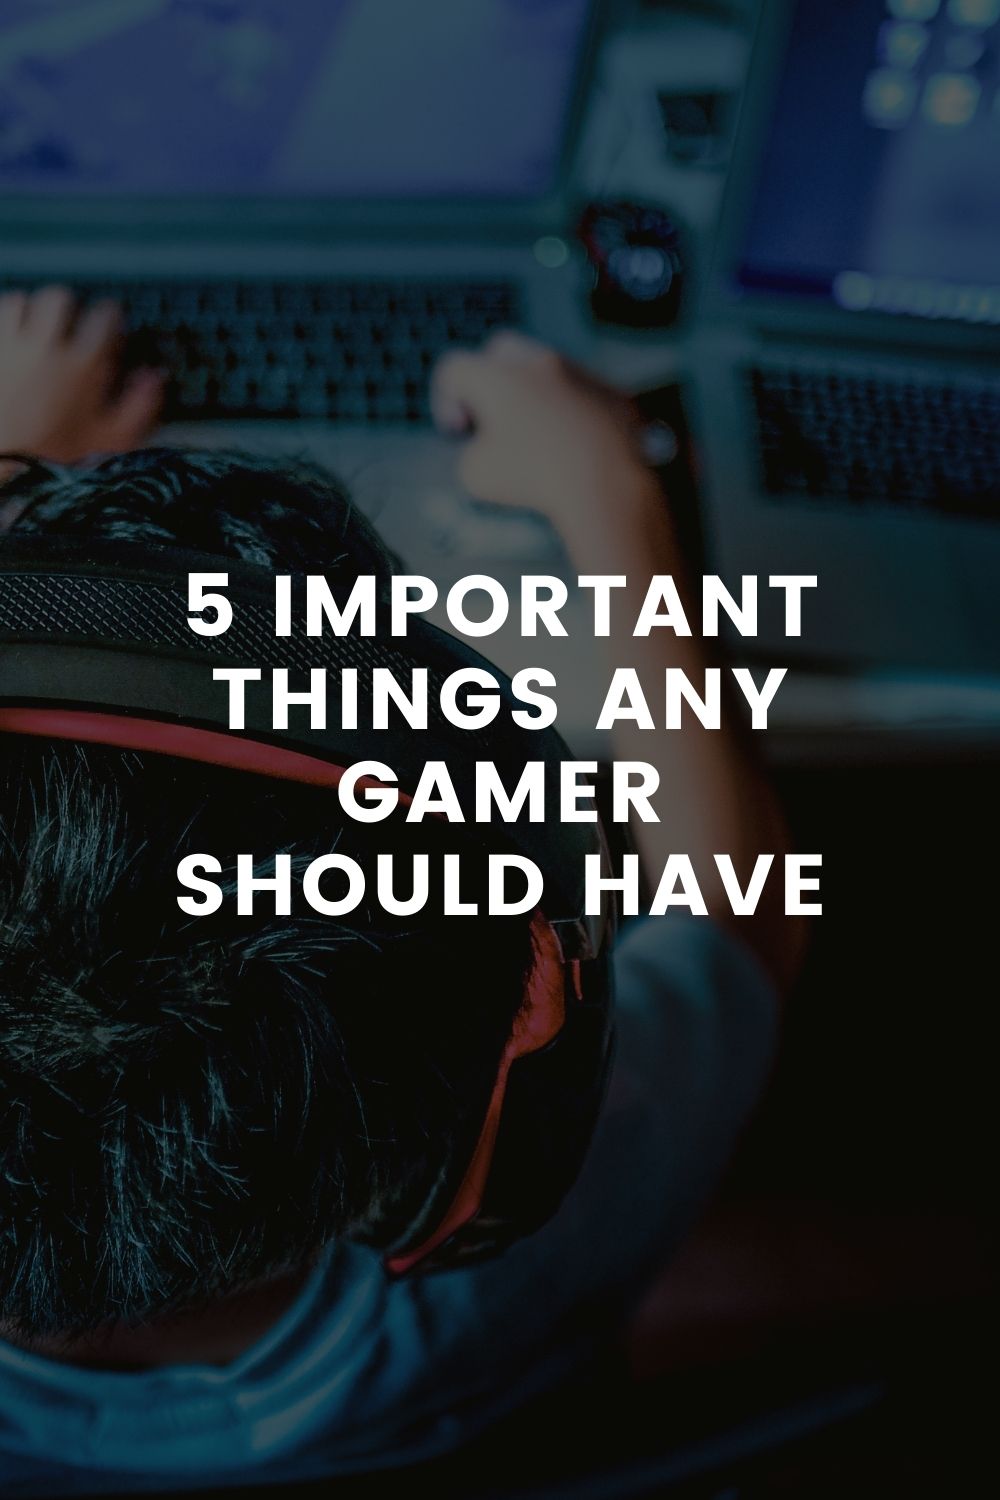 5 Important Things Any Gamer Should Have